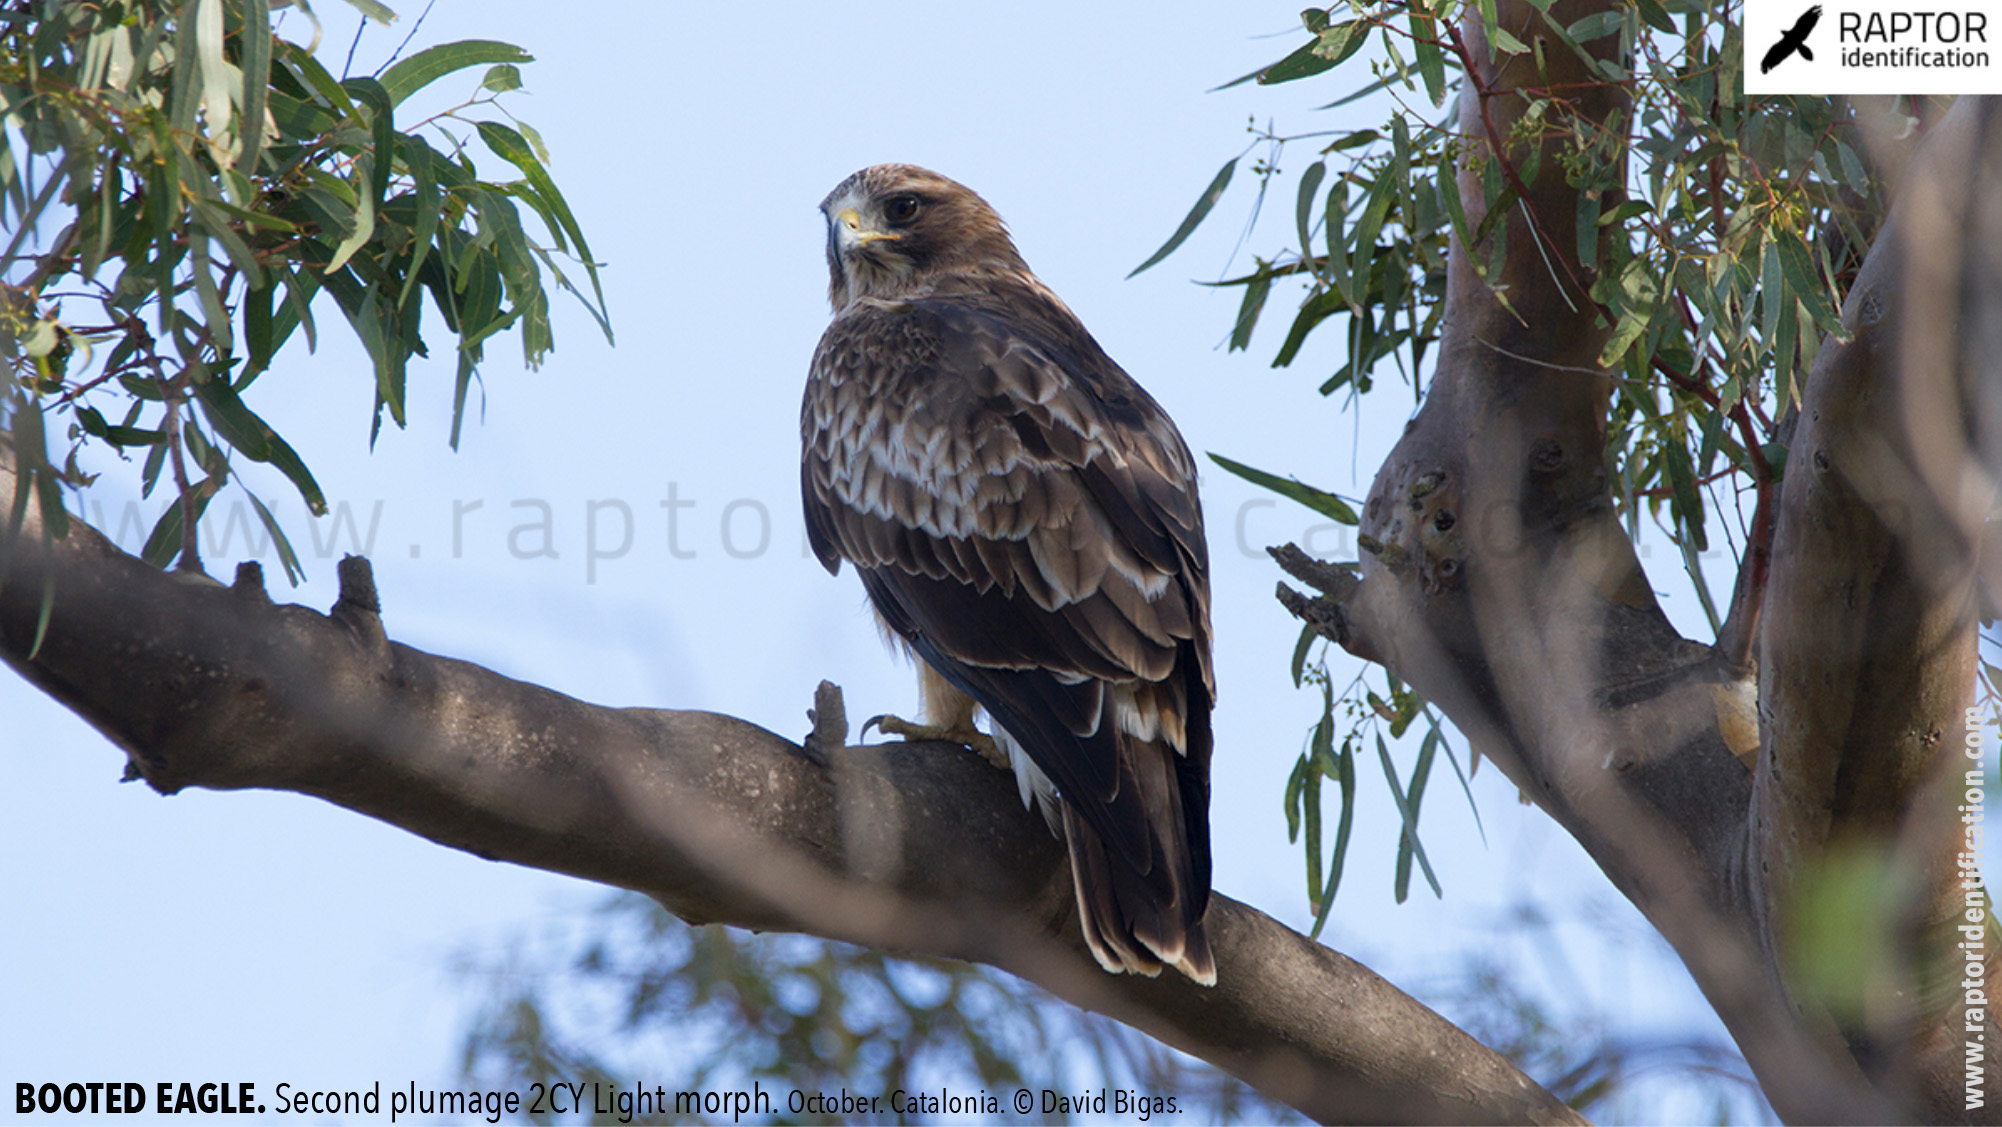 Booted-Eagle-Transitional-plumage-light-morph-identification